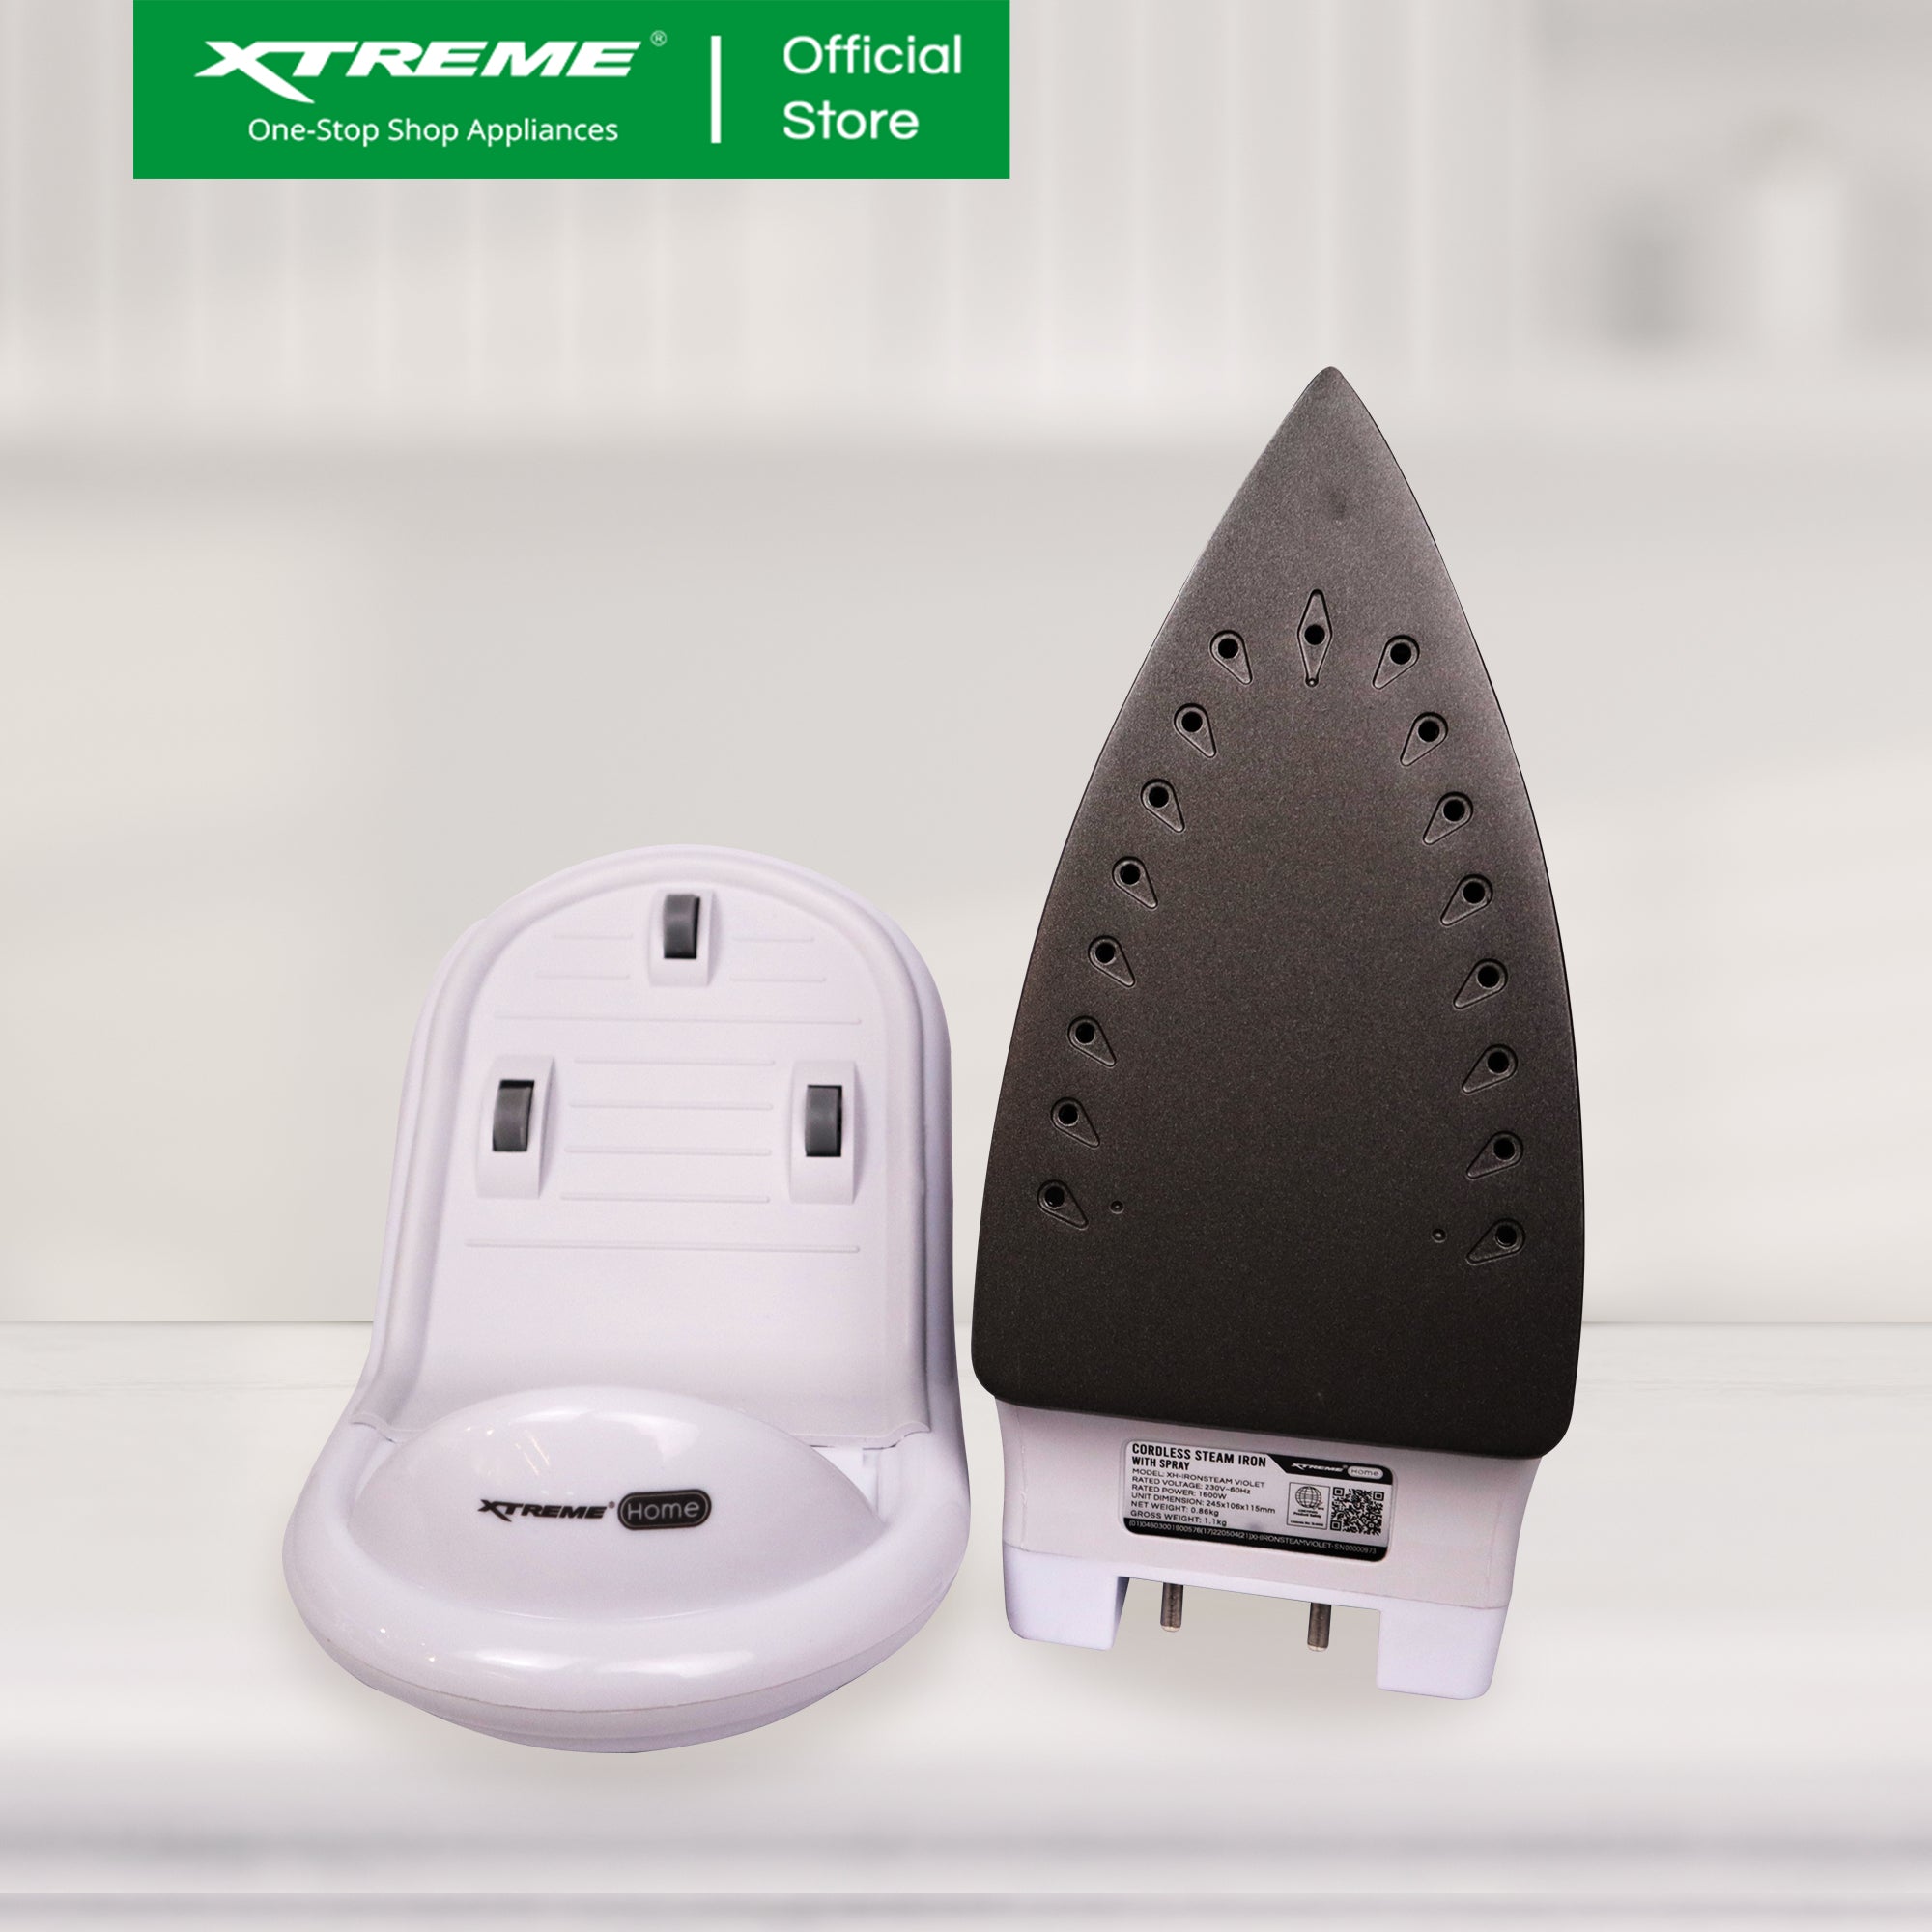 XTREME HOME Cordless Steam Iron with Spray Ceramic Soleplate & Indicator Light (Violet) | XH-IRONSTEAMVIOLET